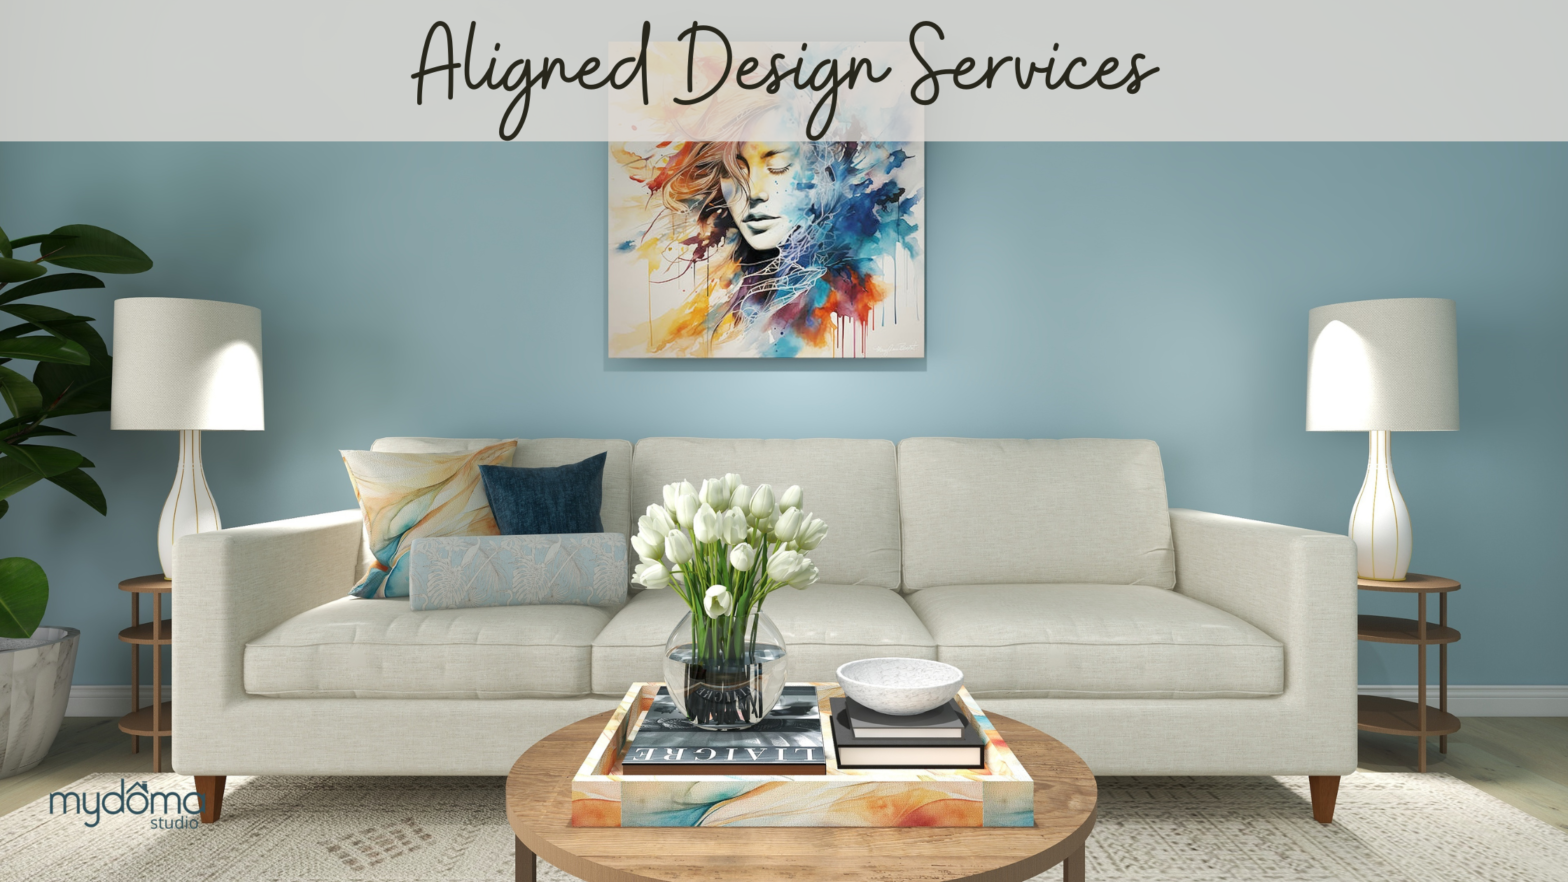 Aligned Design services include a mix of services aligning art, science and color. They include Interior Design, commissioning art, color consulting, home staging and vacation rental design. Services are in person and online, by Northern Lights Home Staging and Design.